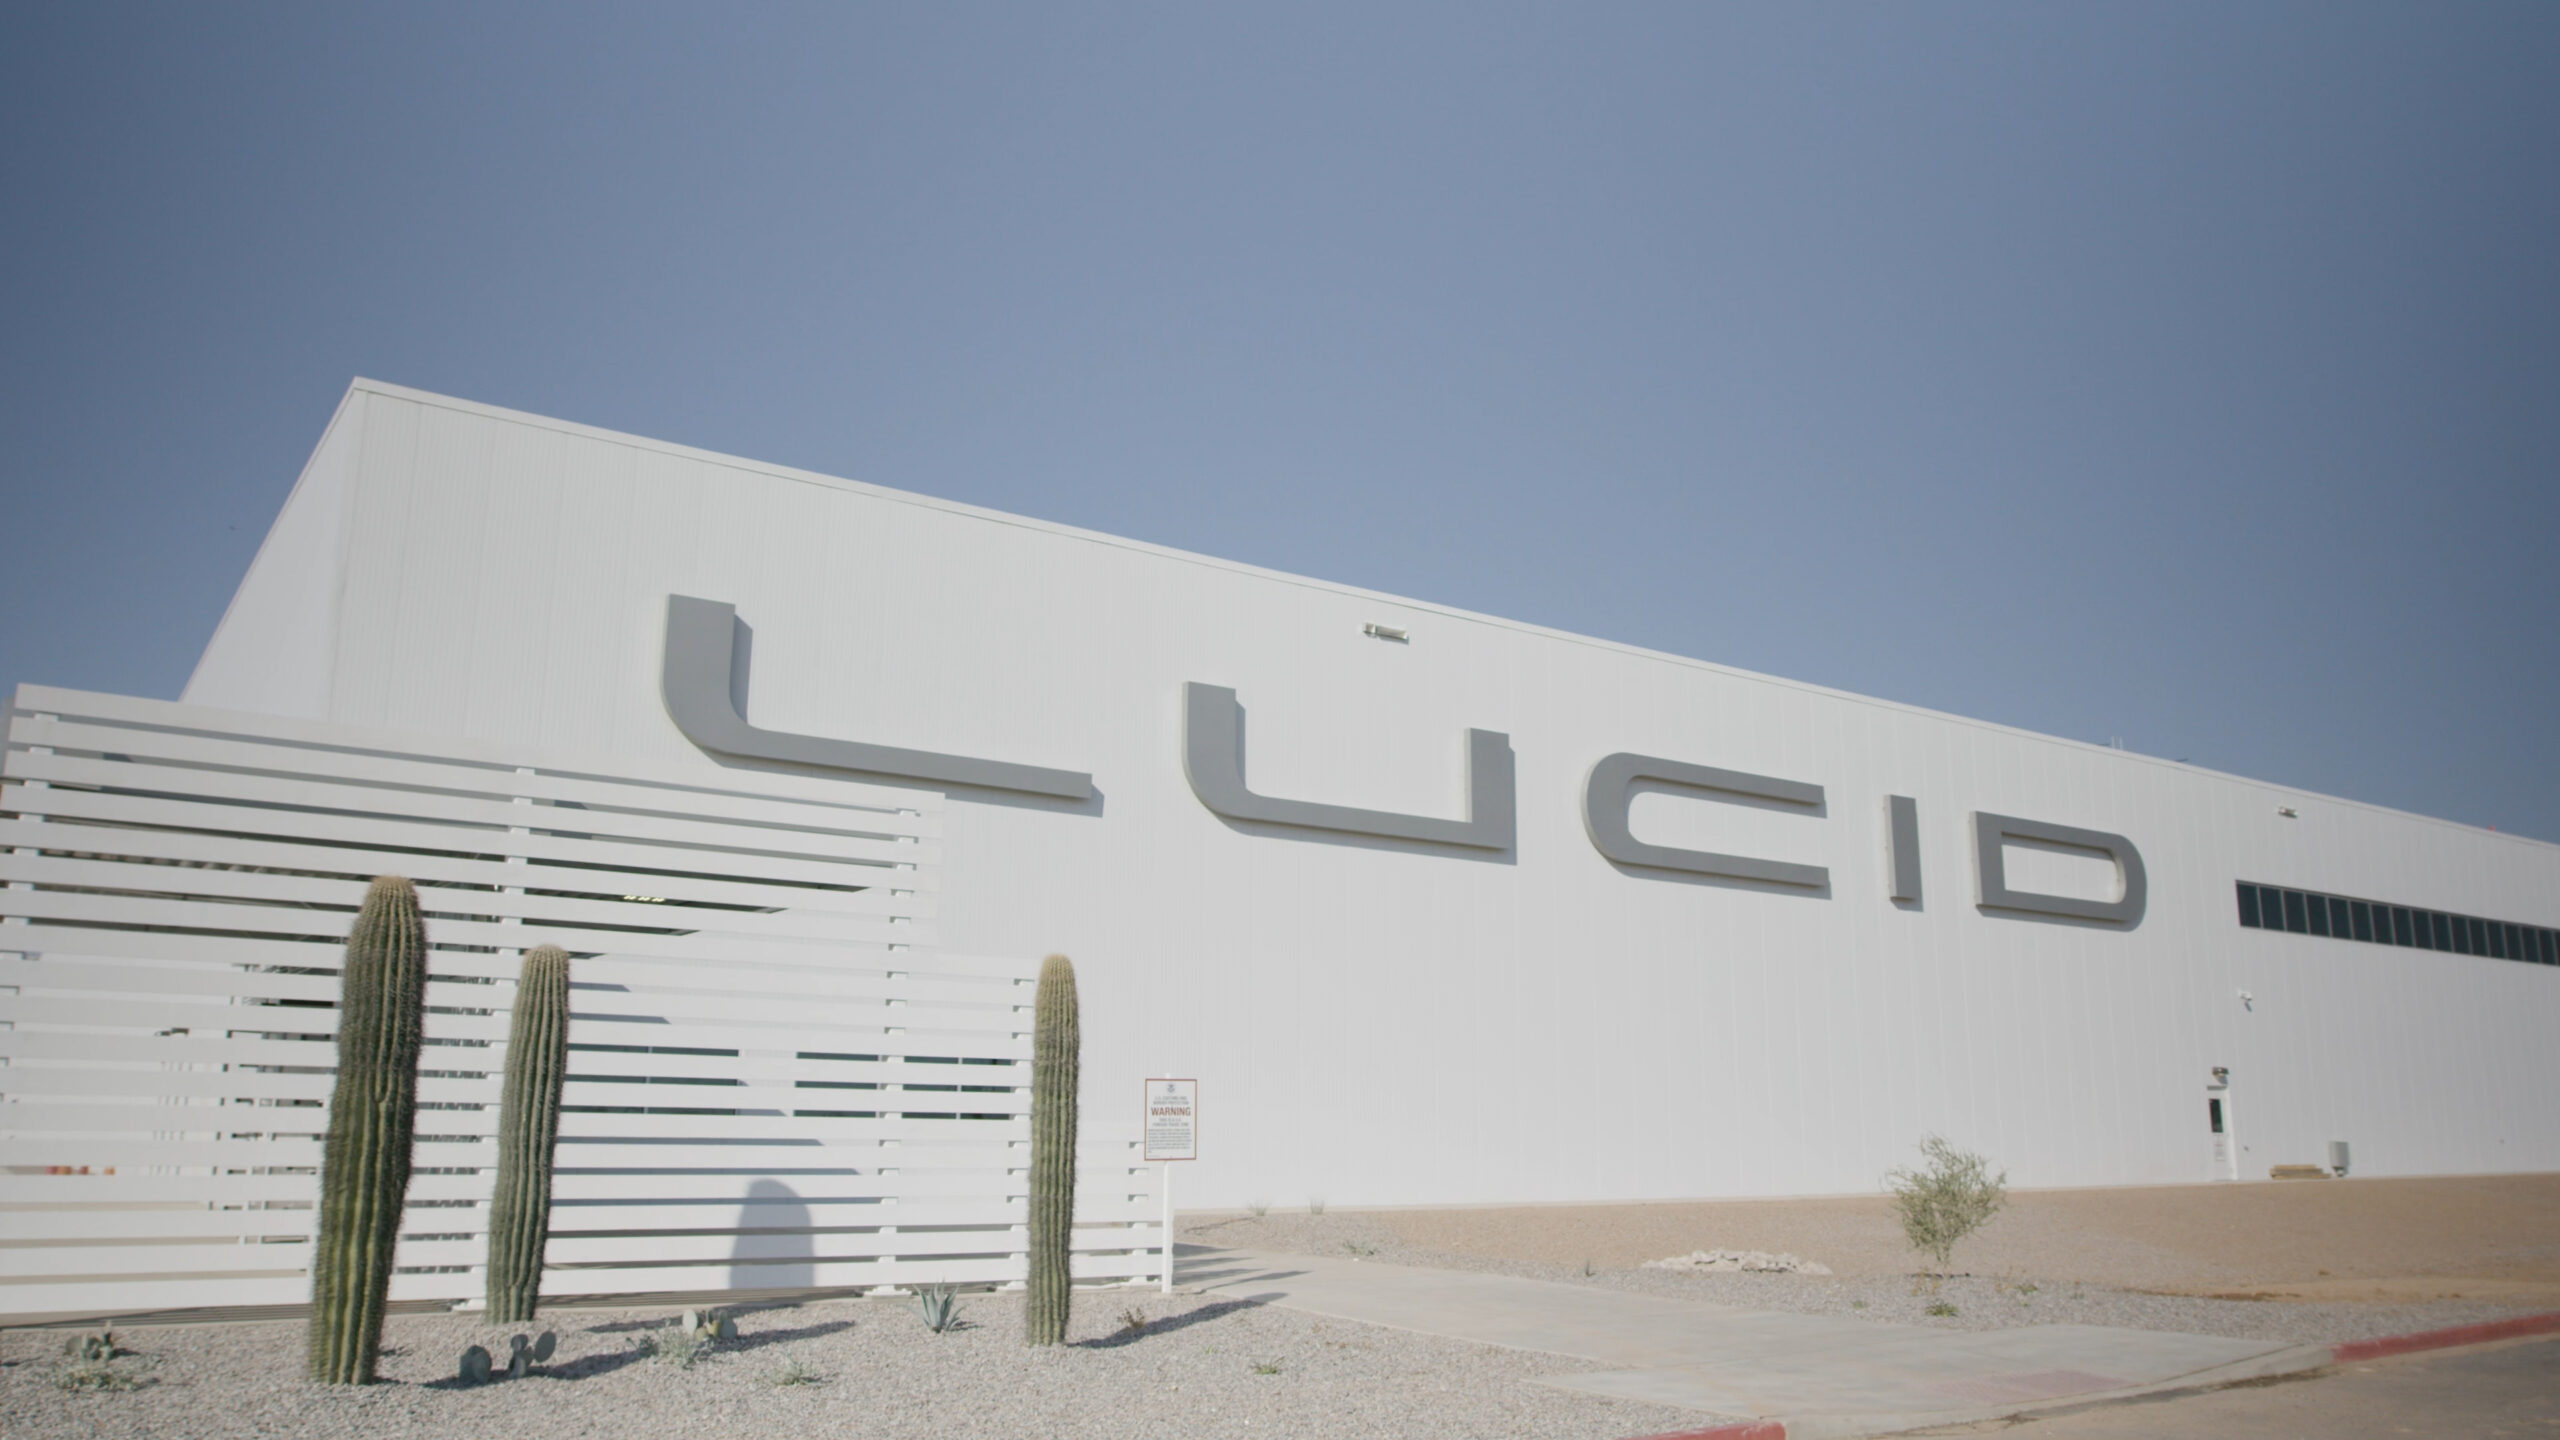 Unvetted Sources On The Changes & Chaos At The Lucid Motors Production Plant